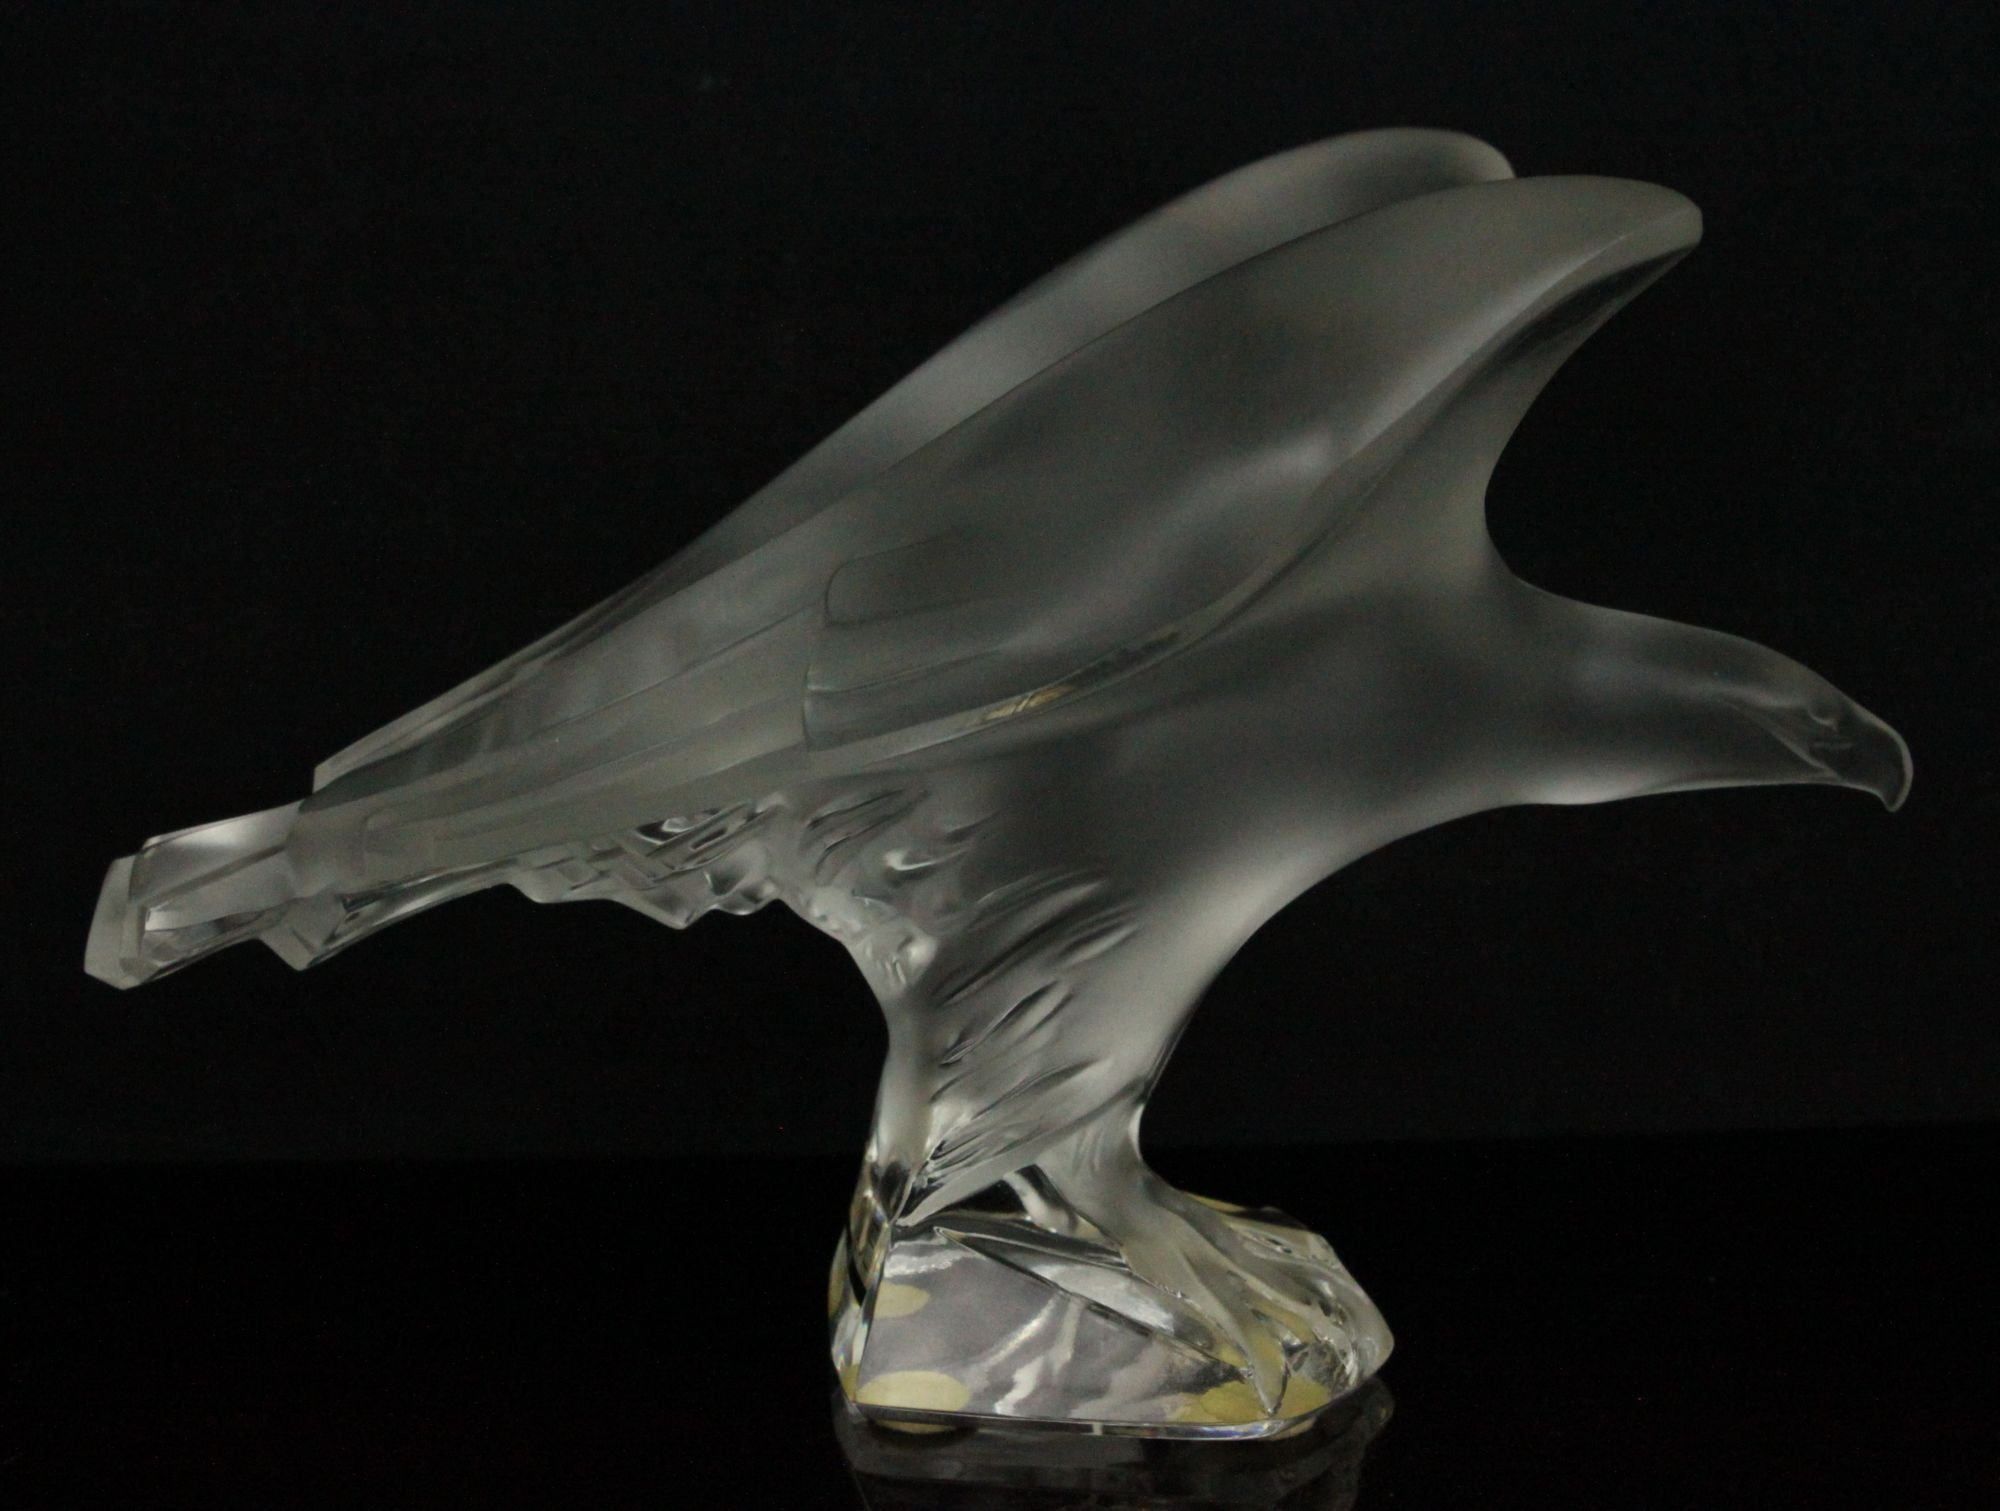 lalique versailles vase of glass figurine lalique royal eagle lalique and other crystal intended for glass figurine lalique royal eagle